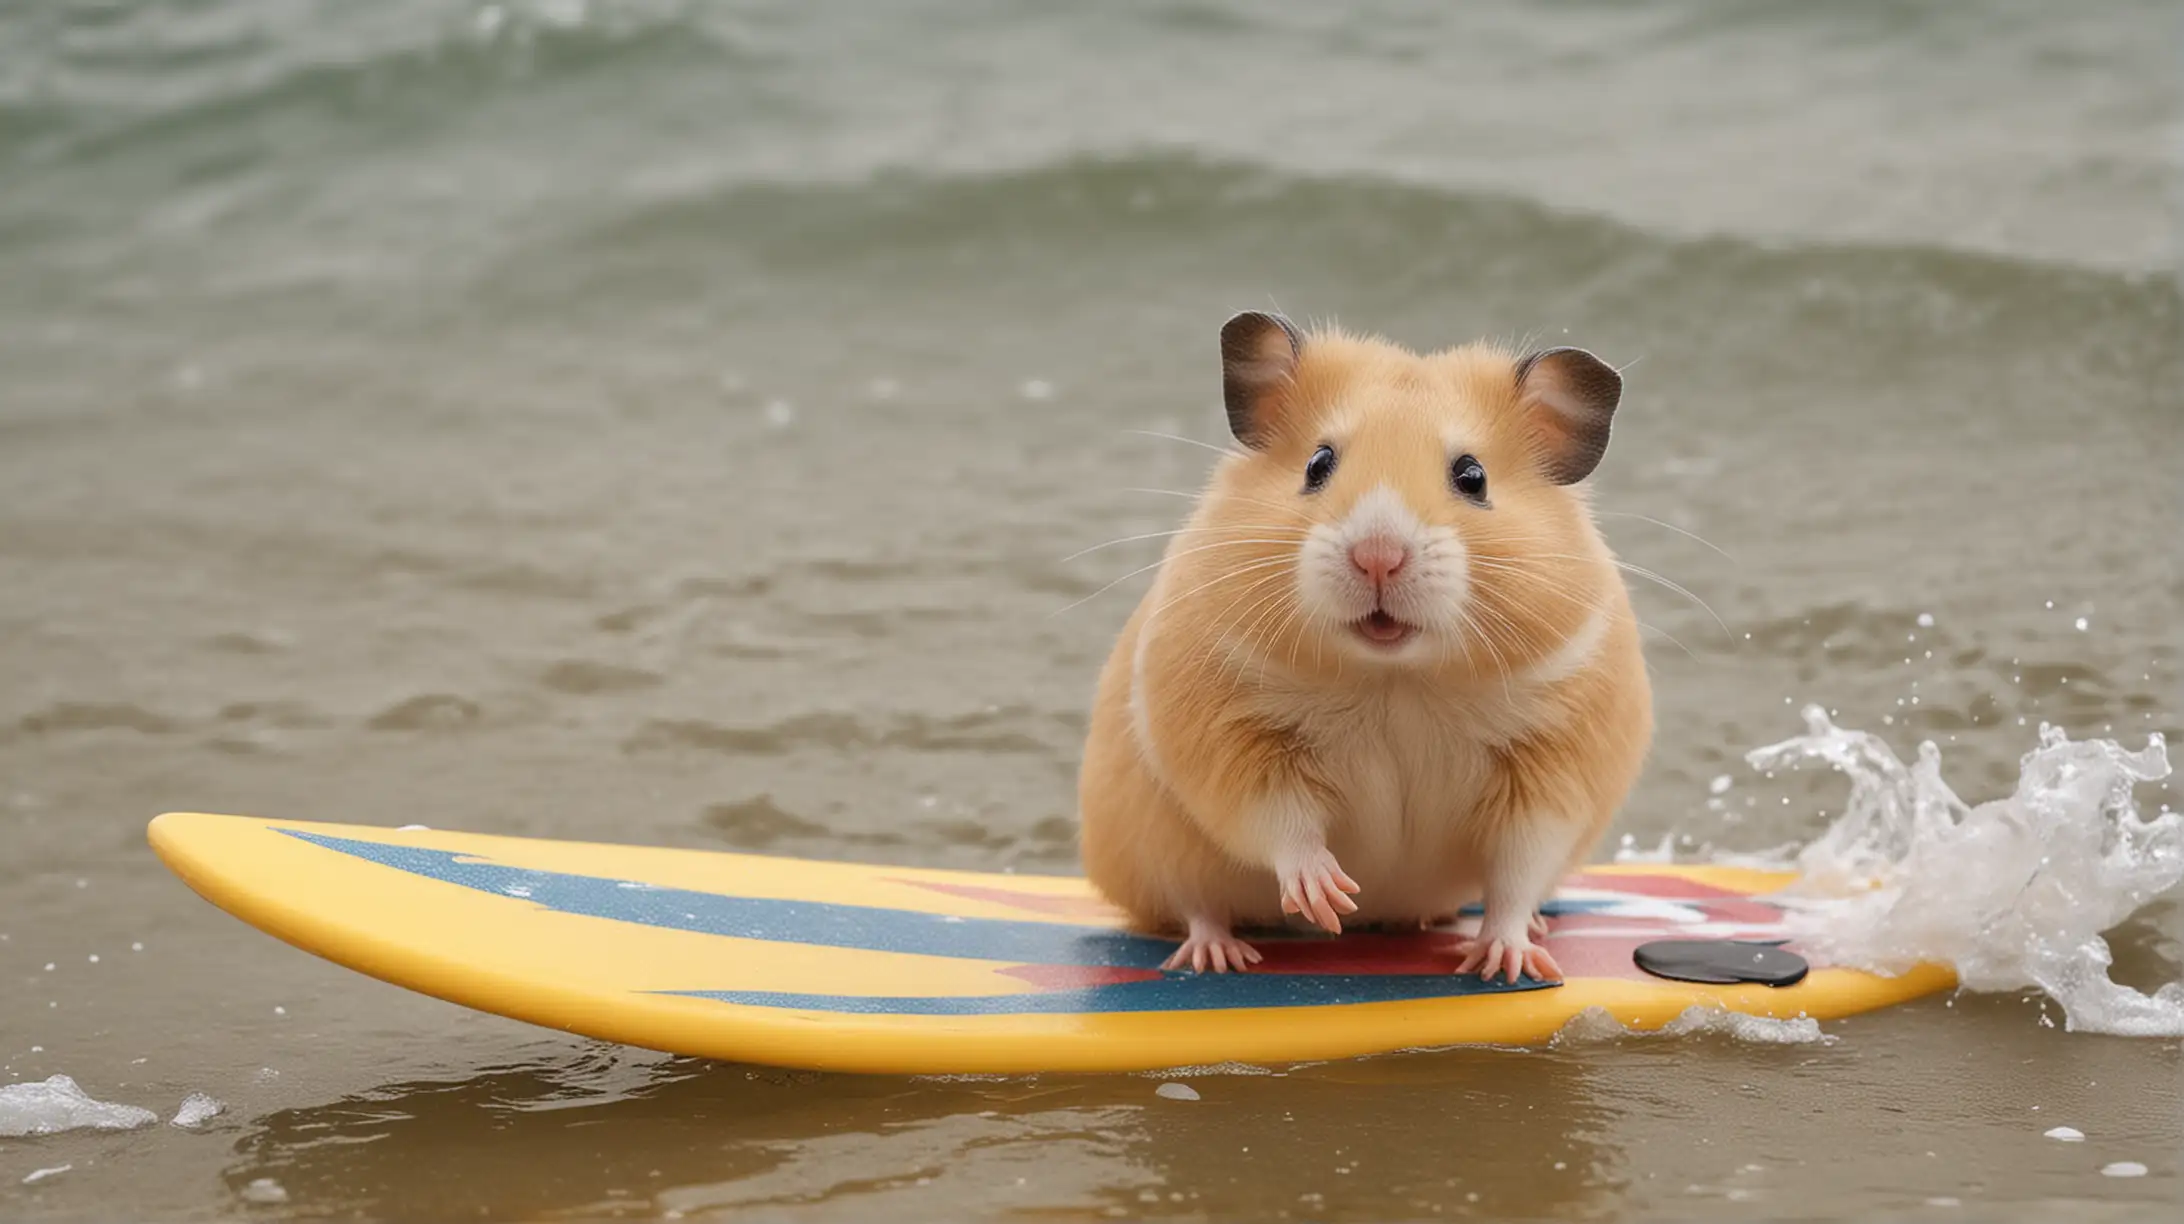 one cute hamster at the beach surfing with a surfboard, enjoying the surfing 